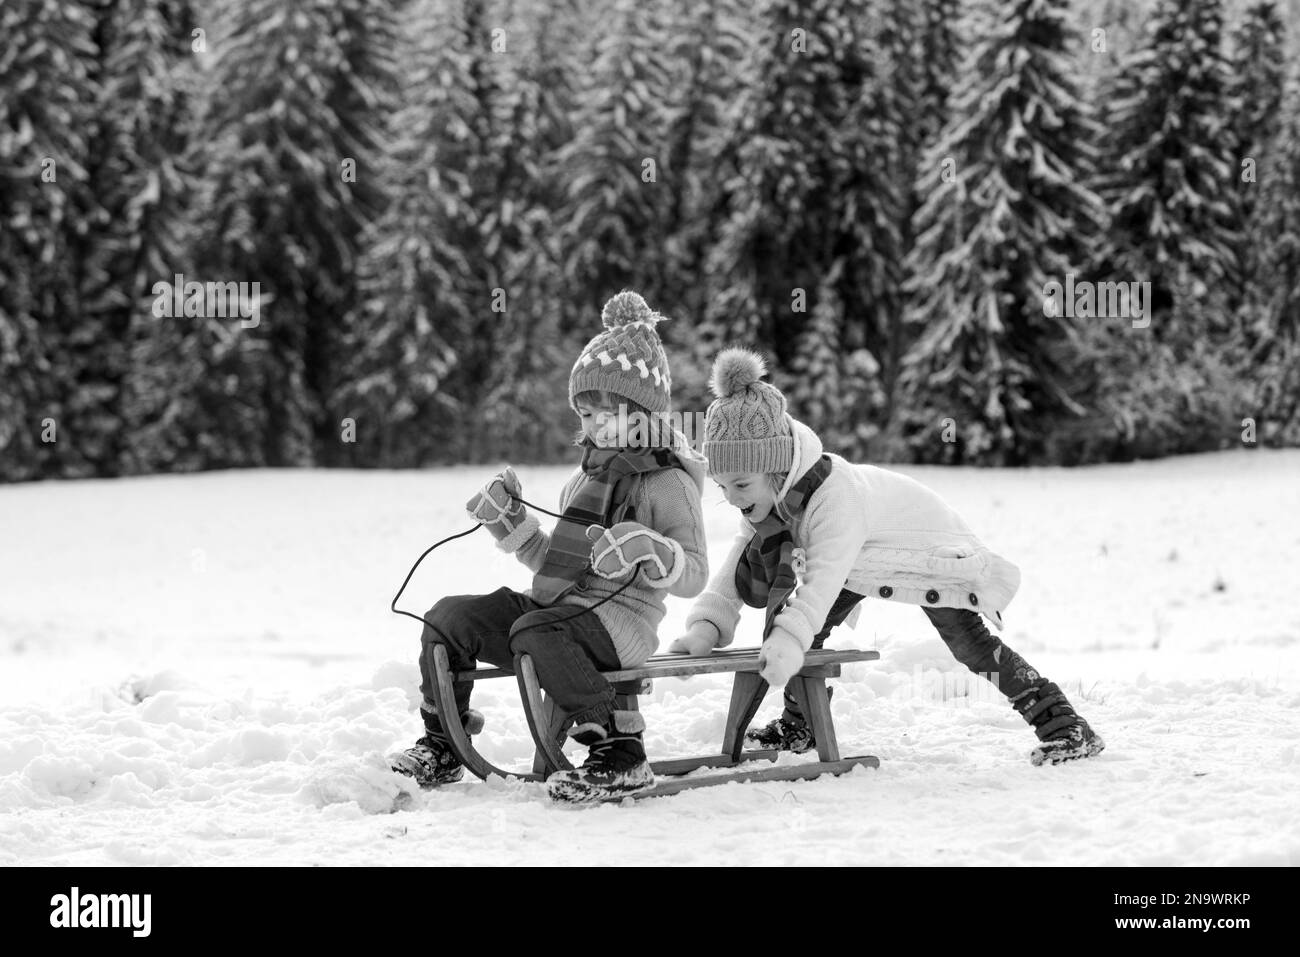 Funny children in snow ride on sled. Winter outdoors games. Happy Christmas family vacation concept. Kids enjoy the holiday. Stock Photo